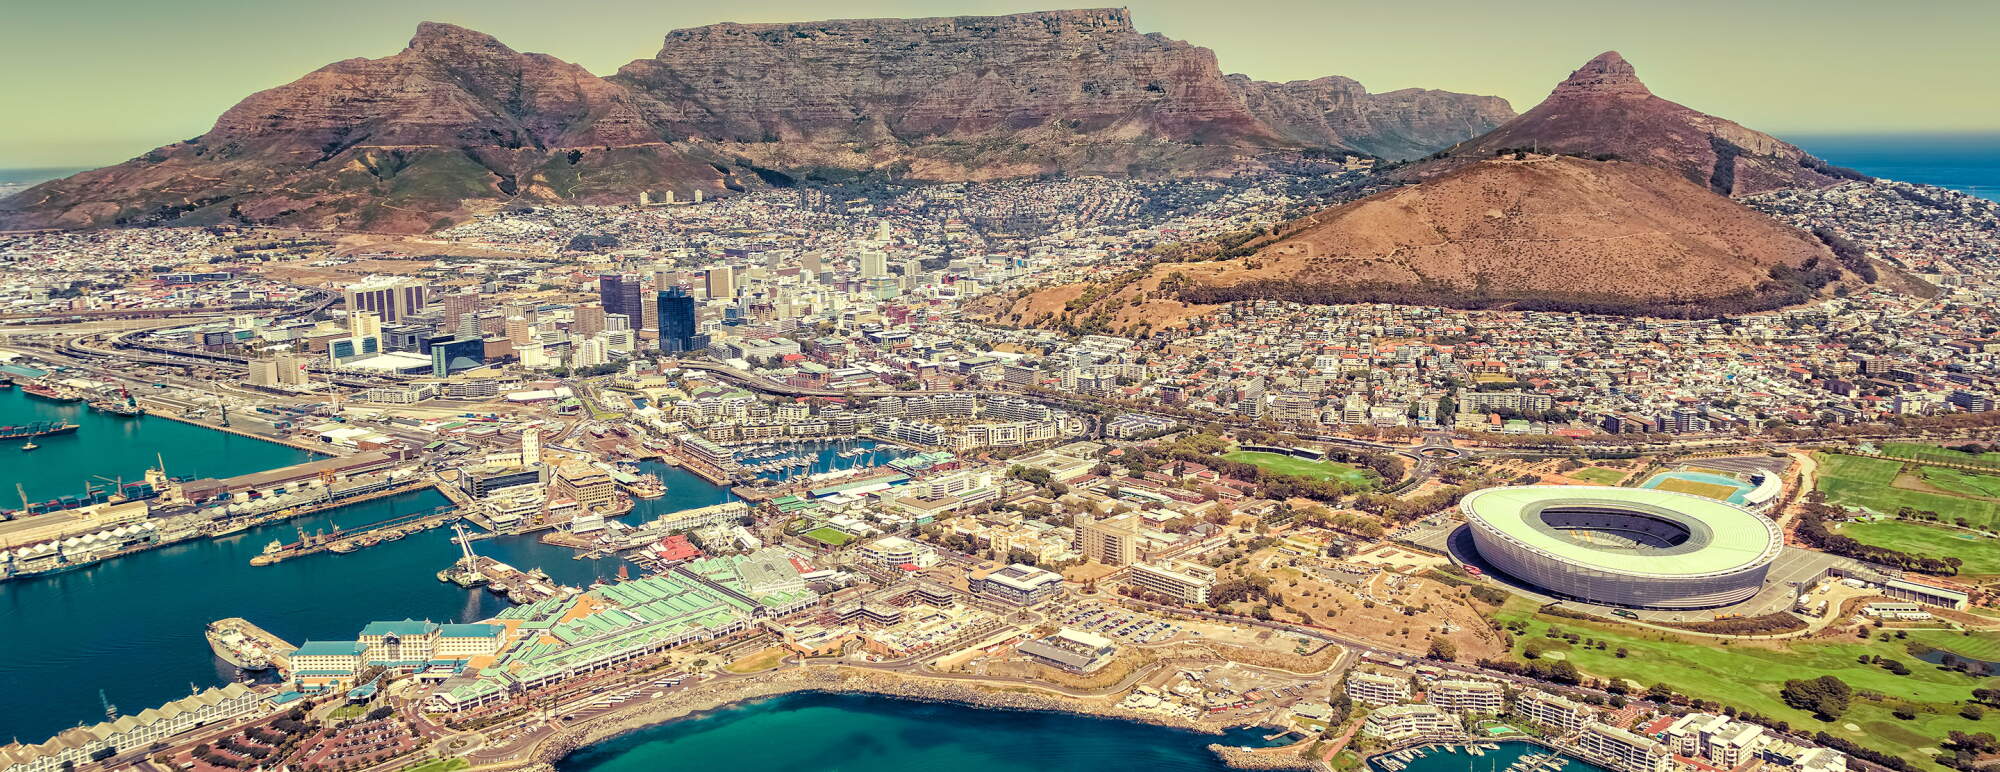 South Africa aerial